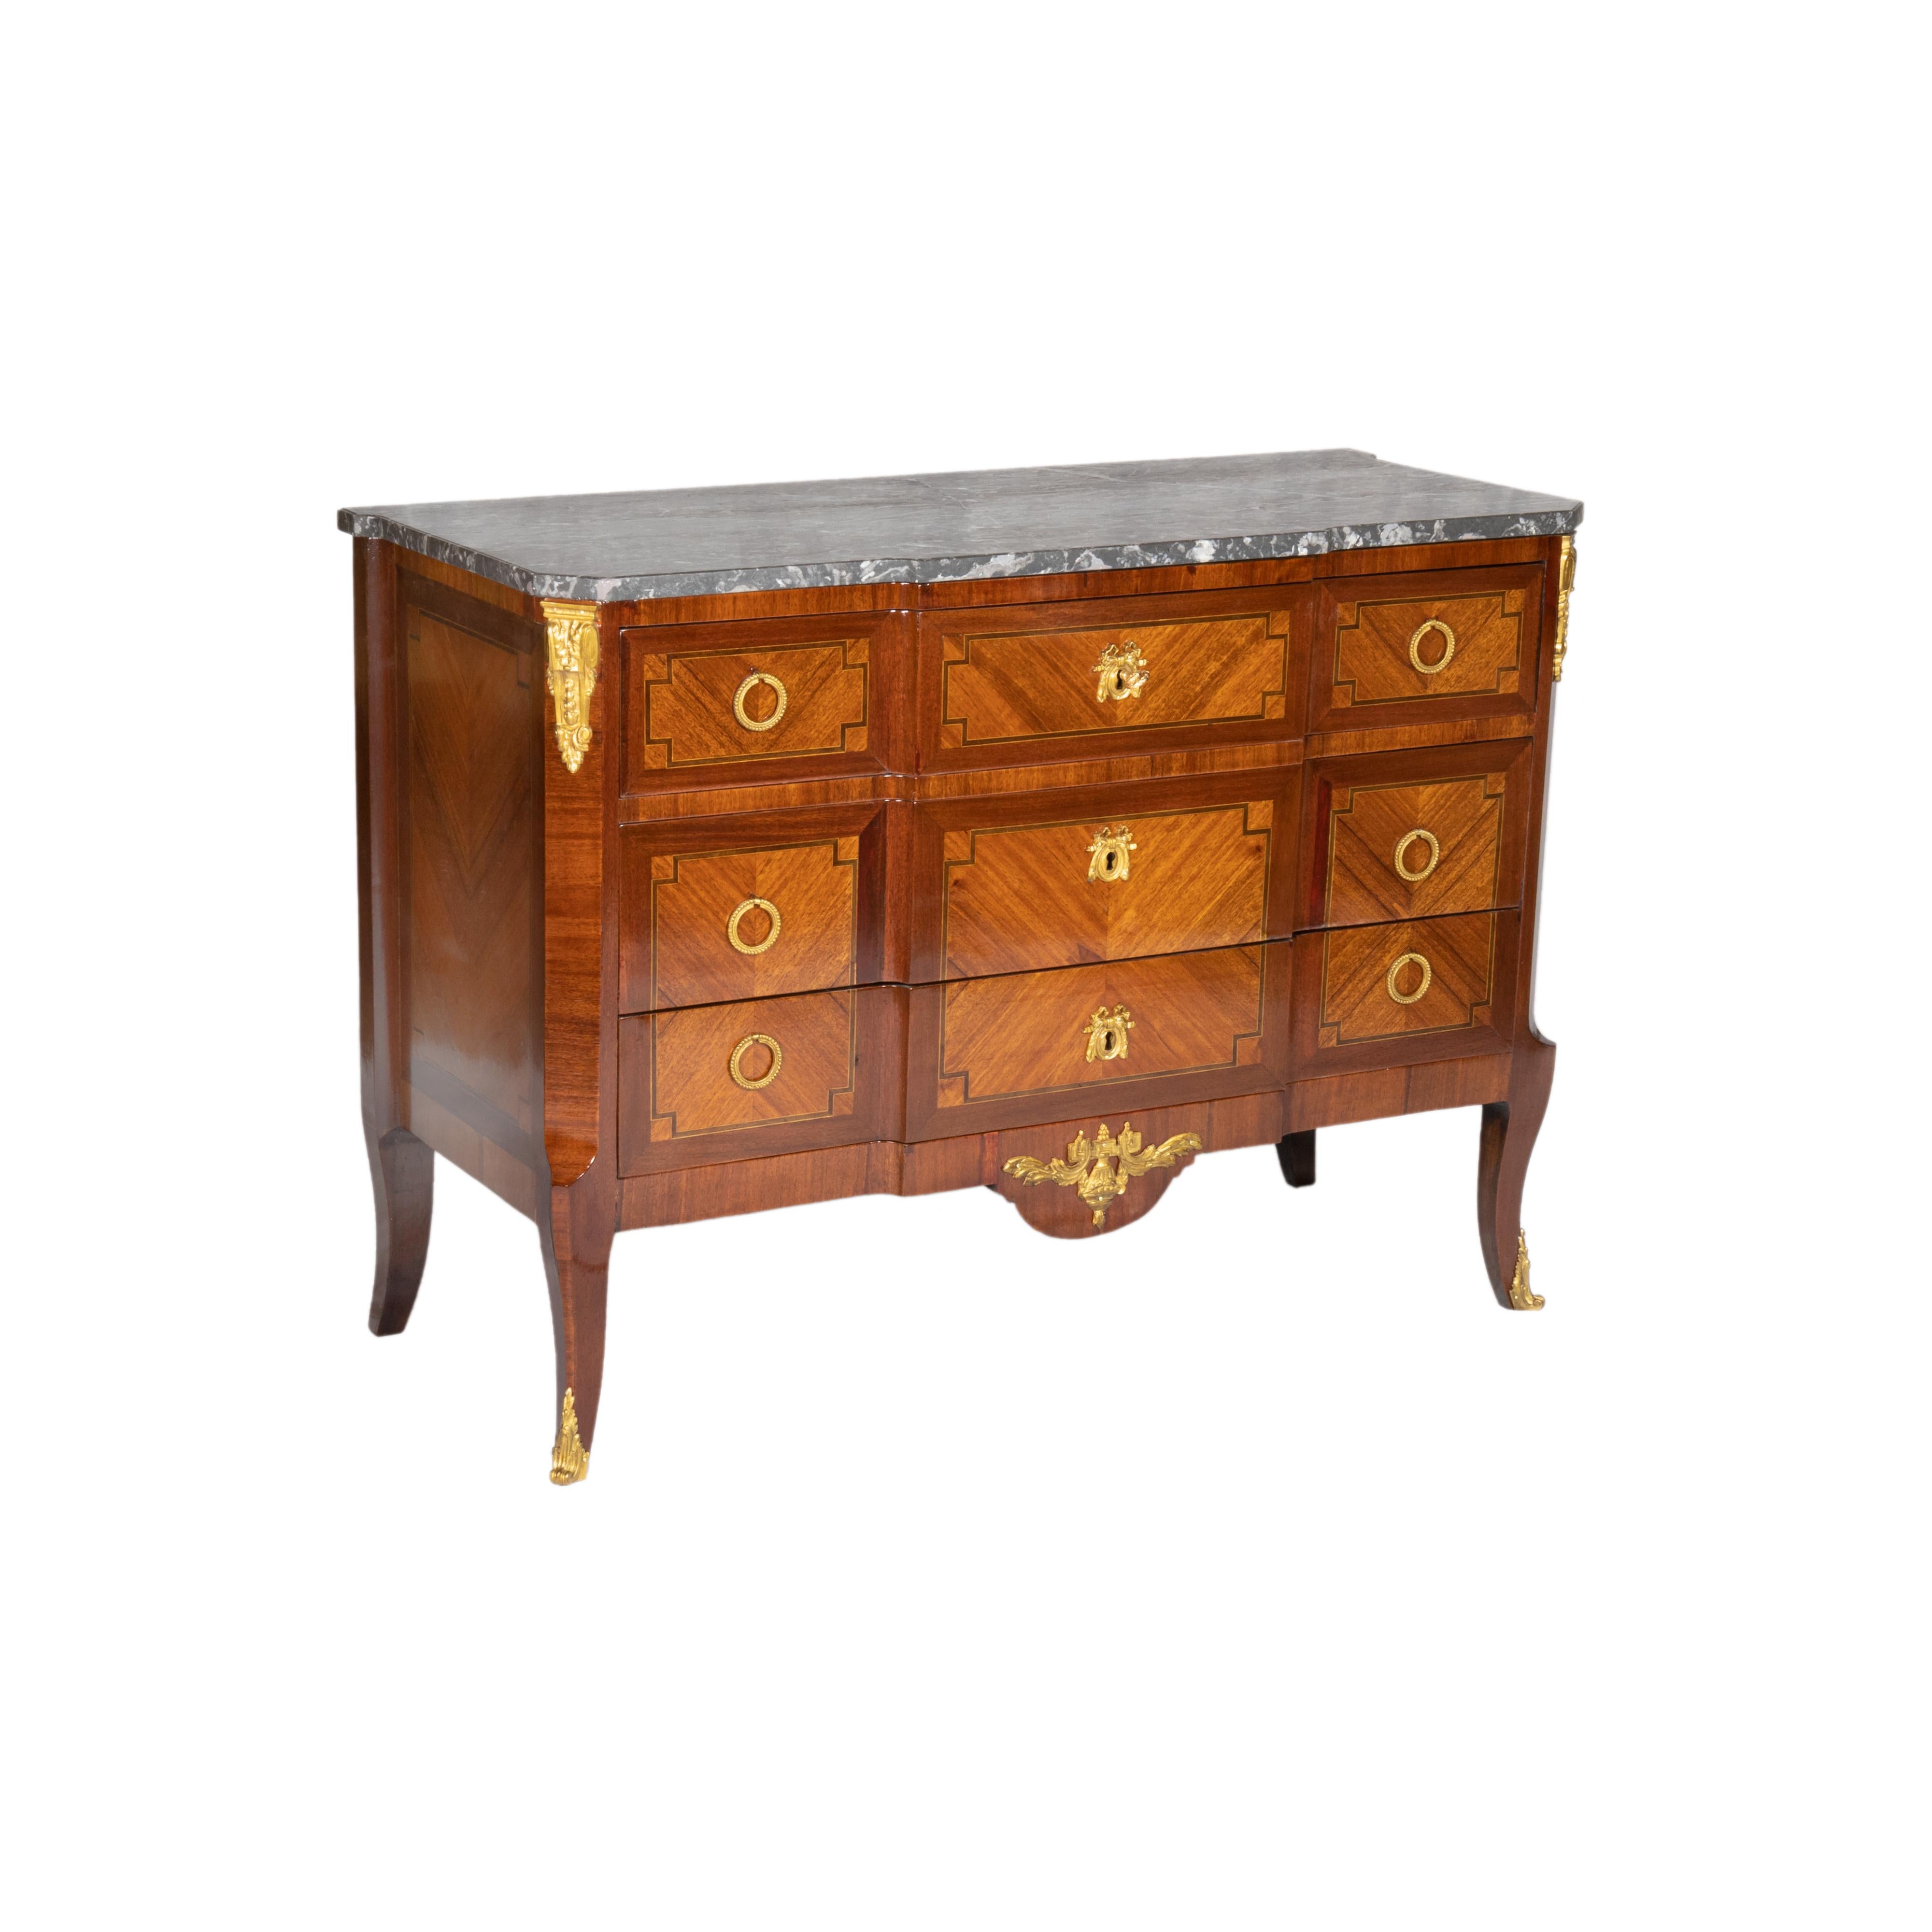 A marble top of breakfront shape french Empire commode with tapered feet adorned, chiseled brass shoes, handles and friezes intricately bronze chiseled. The side flanks showcase fourleaf framed exotic parquetry inlaid borders, while the top boasts